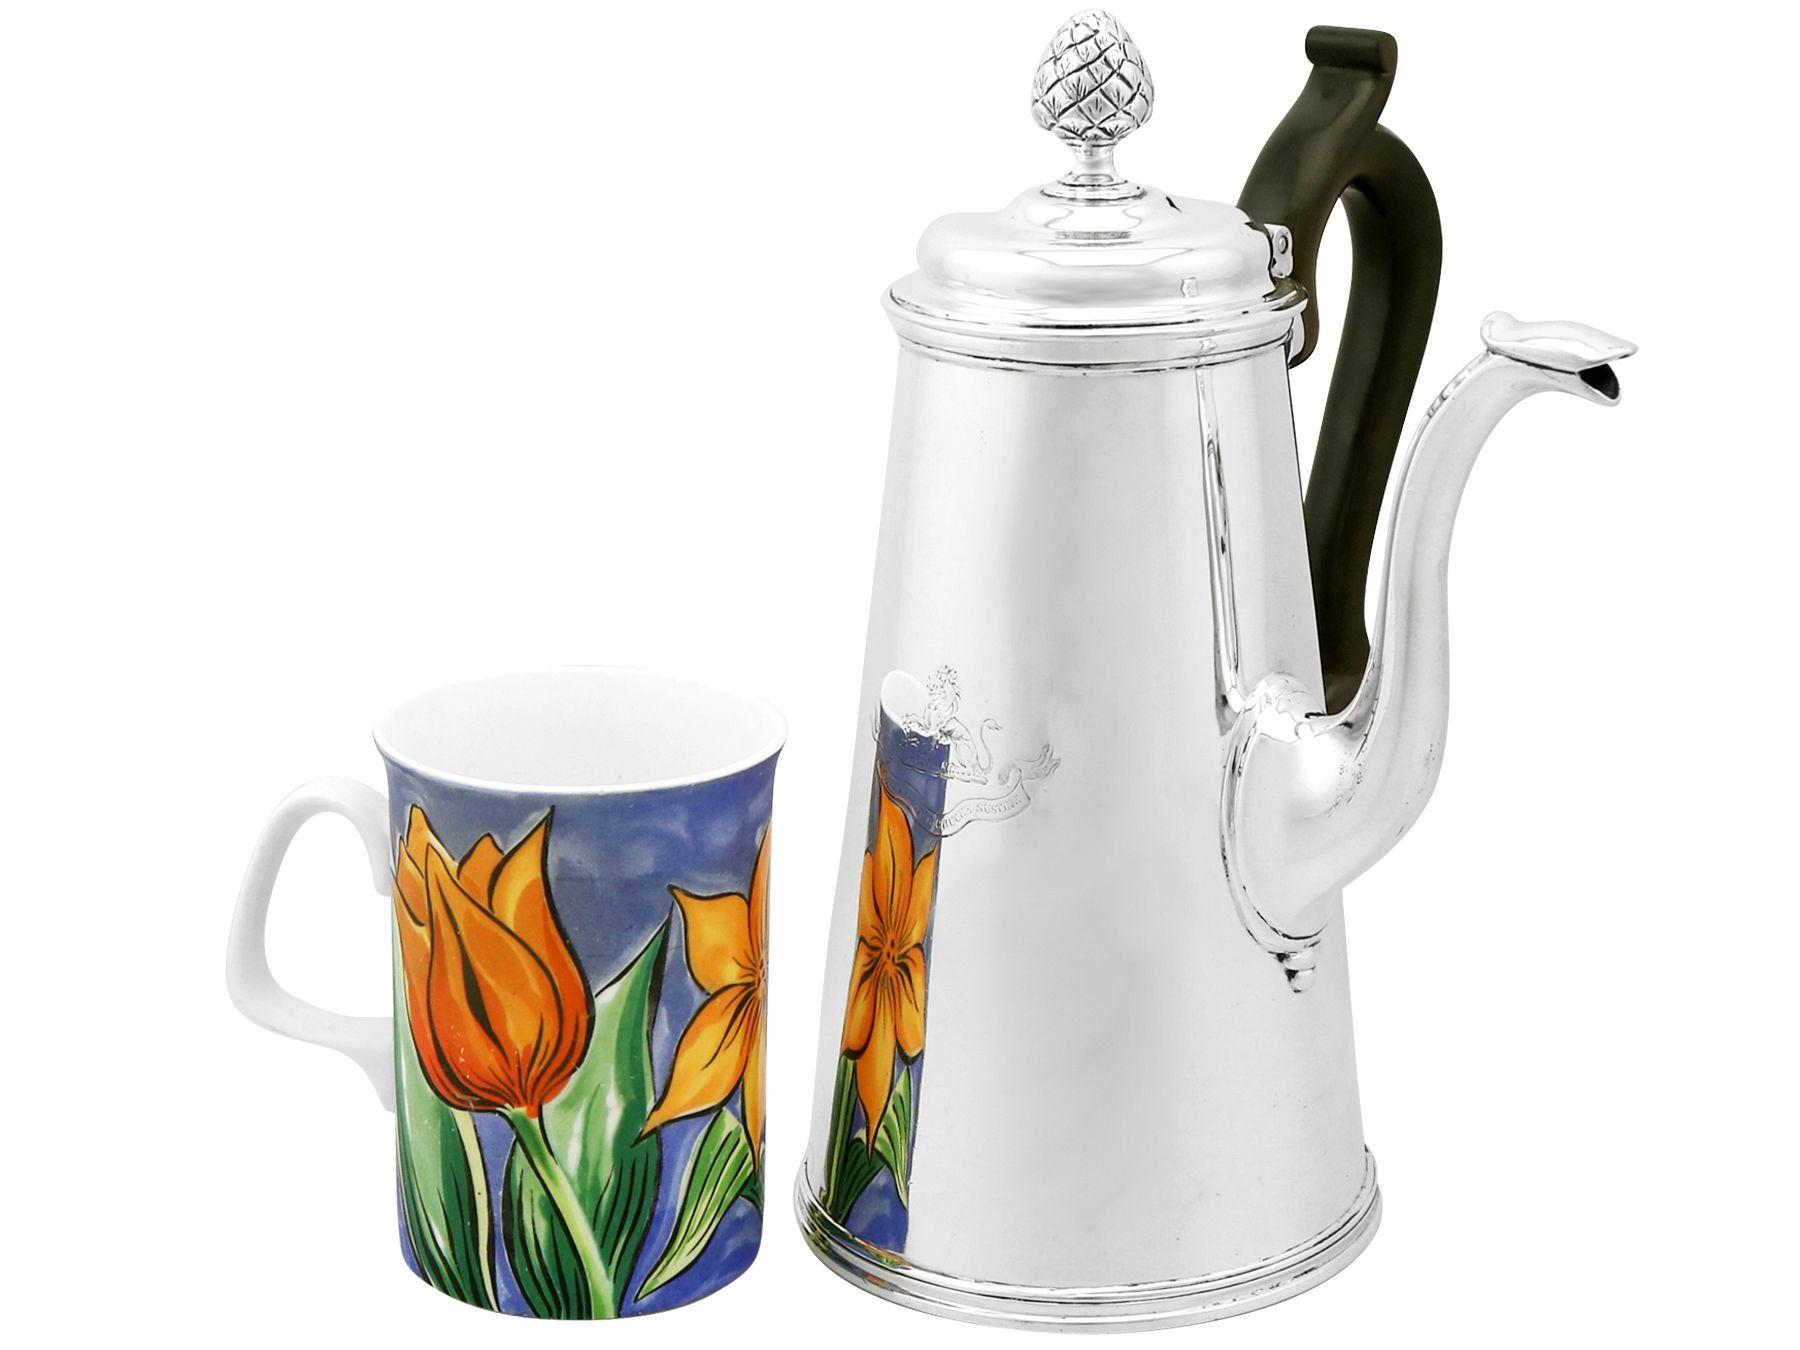 An exceptional, fine and impressive antique Victorian English sterling silver coffee pot; an addition to our silver teaware collection

This exceptional antique sterling silver coffee pot has a plain tapering cylindrical form with a moulded base,